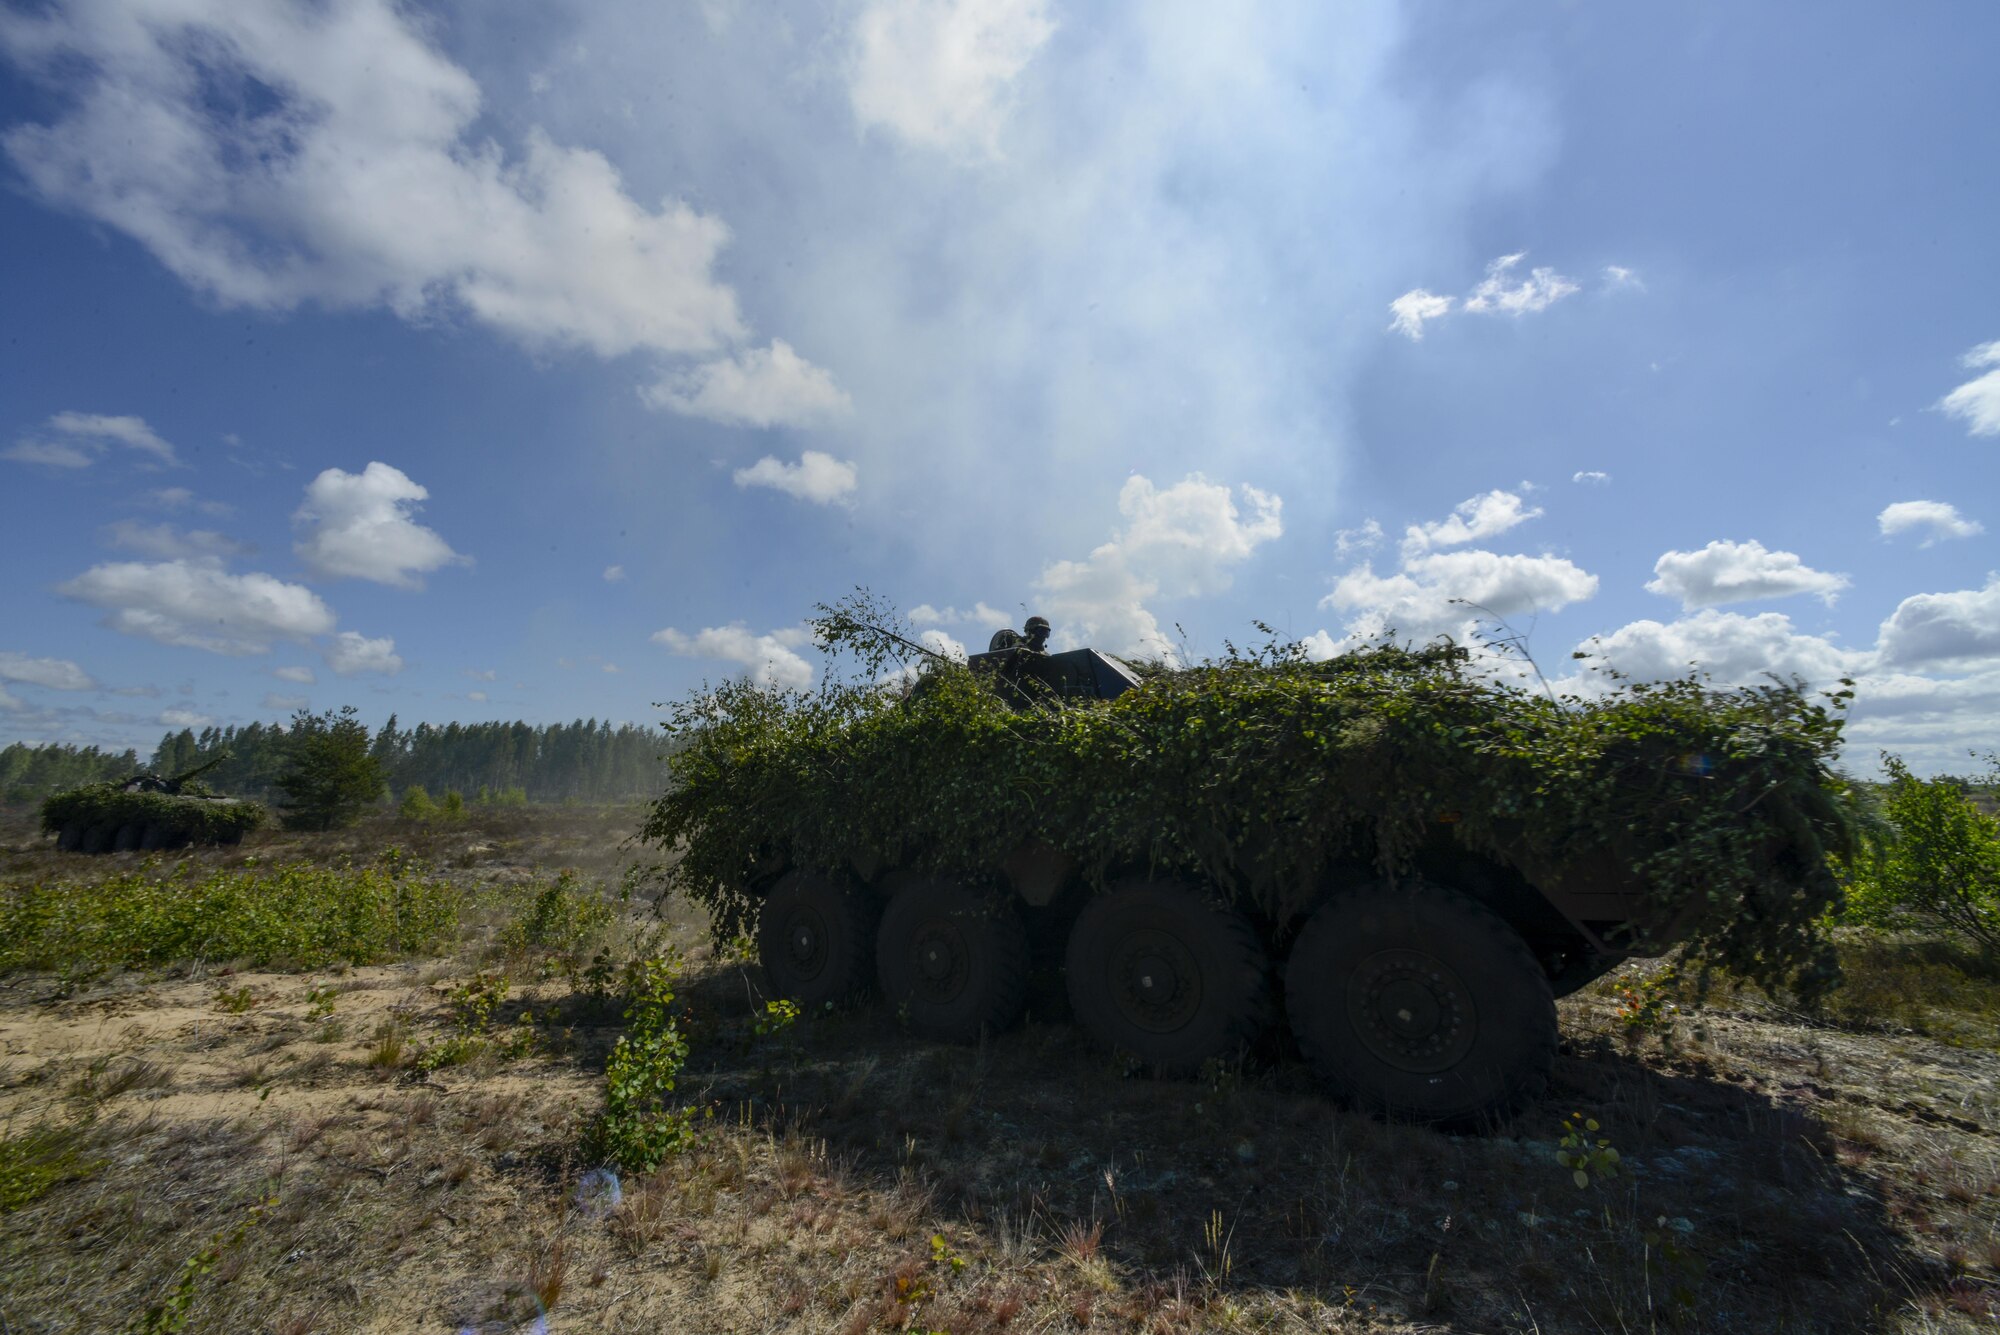 NATO forces drive tanks across a simulated battlefield during a training exercise June 13, 2016, at Adazi Military Training Base, Latvia.  U.S. forces and NATO partners are in Europe participating in Saber Strike 16; a long-standing, U.S. Joint Chiefs of Staff-directed, U.S. Army Europe-led cooperative-training exercise, which has been conducted annually since 2010. Saber Strike rapidly deploys personnel across the Baltic region, ensuring allied and partnered nations are able to quickly assemble and train anywhere they are called to do so. (U.S. Air Force photo/Senior Airman Nicole Keim)